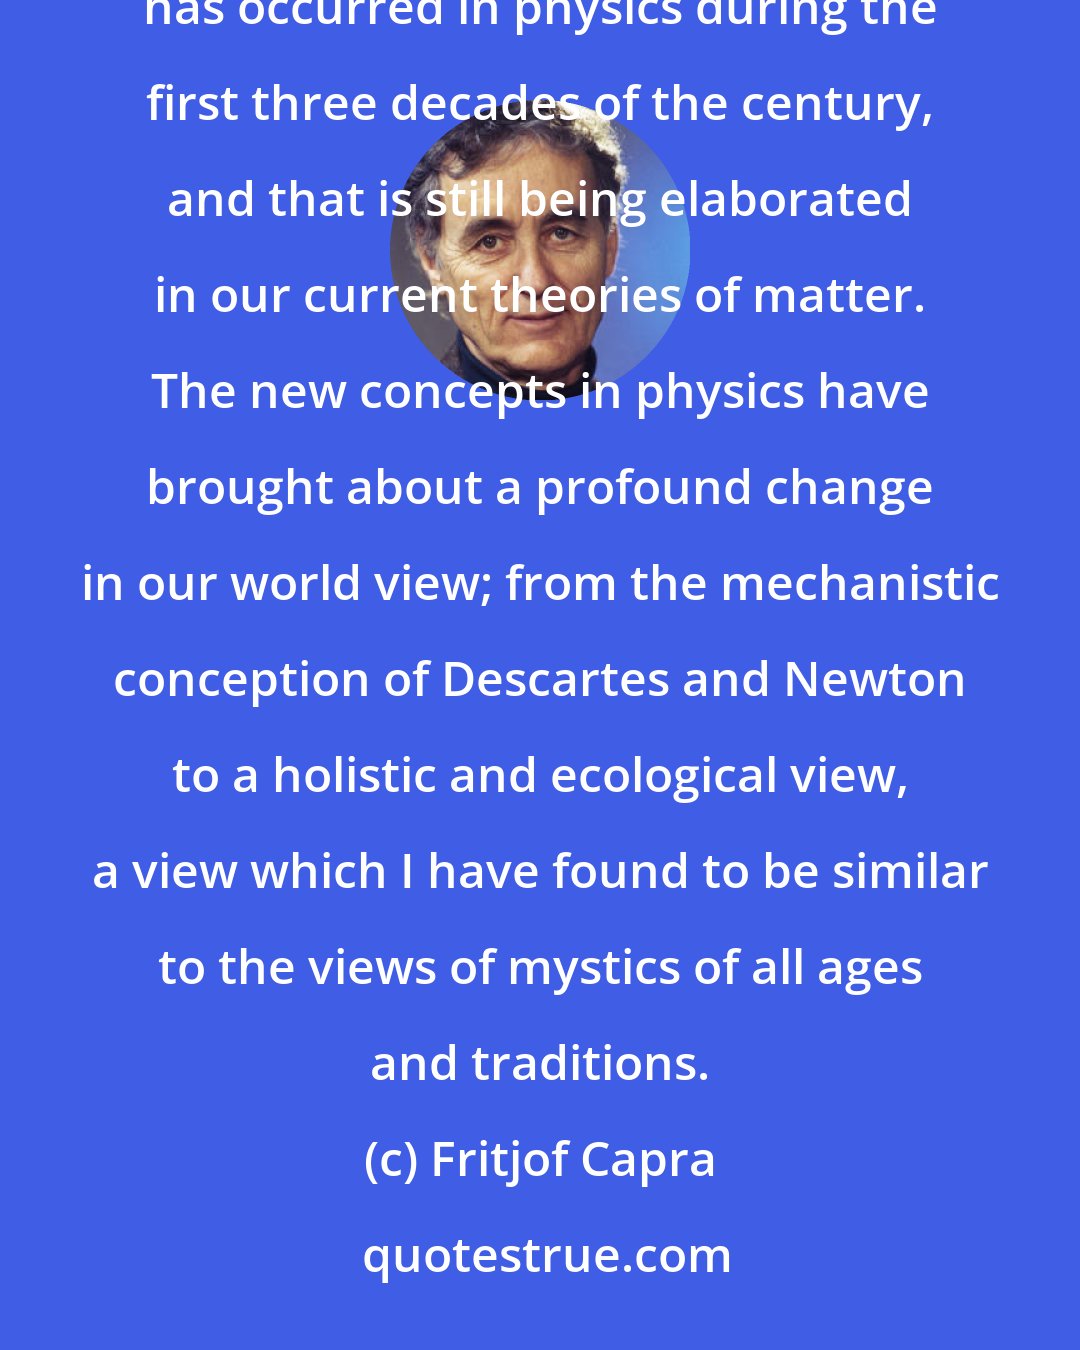 Fritjof Capra: My main professional interest during the 1970s has been in the dramatic change of concepts and ideas that has occurred in physics during the first three decades of the century, and that is still being elaborated in our current theories of matter. The new concepts in physics have brought about a profound change in our world view; from the mechanistic conception of Descartes and Newton to a holistic and ecological view, a view which I have found to be similar to the views of mystics of all ages and traditions.